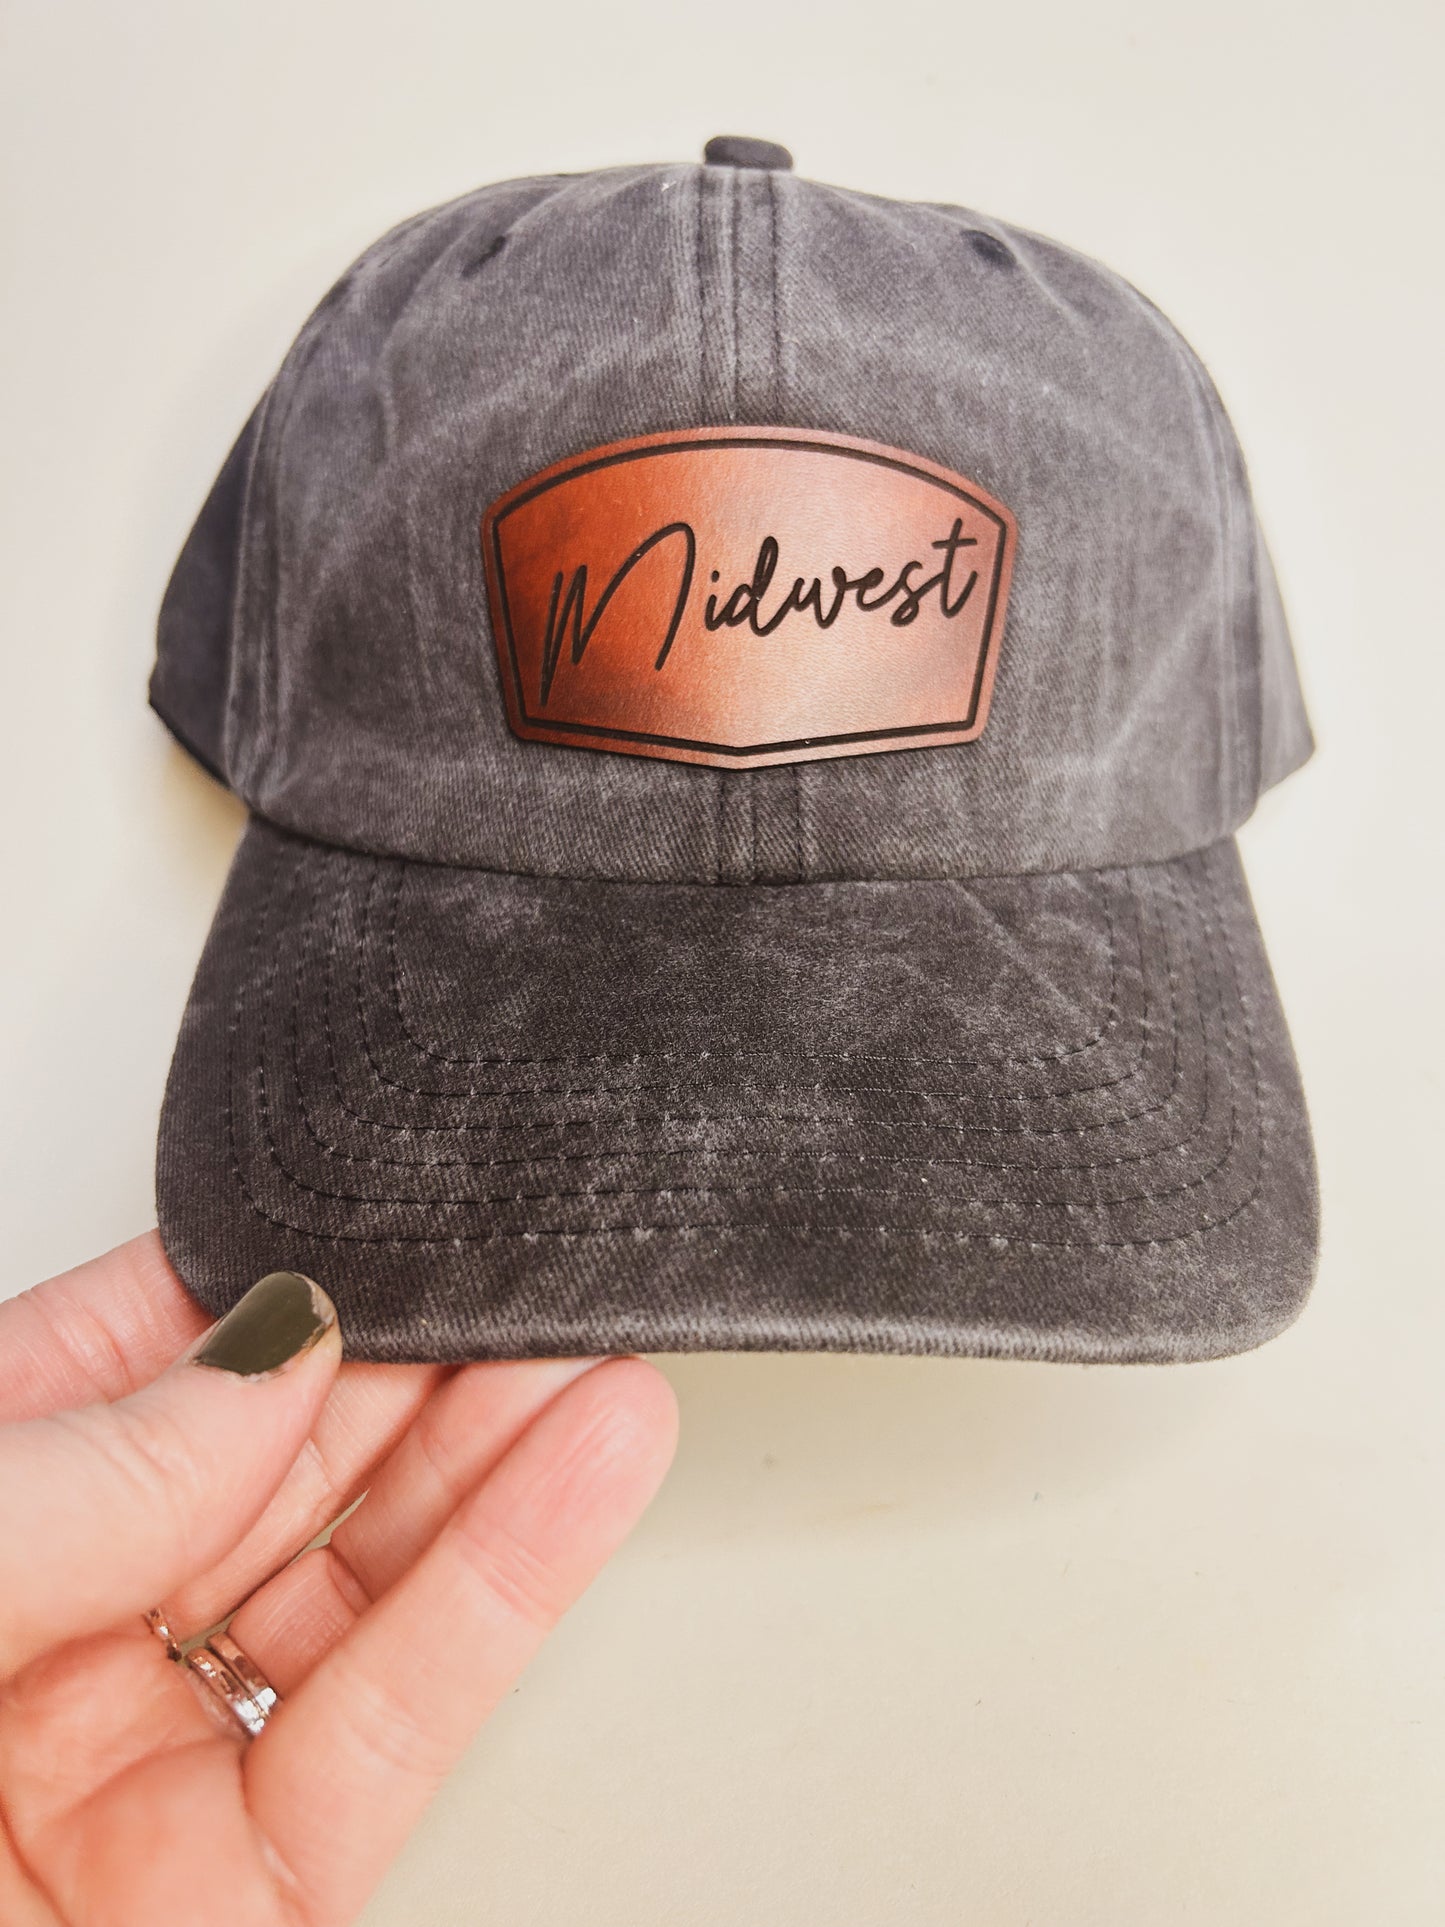 Midwest Patch on Black Baseball Hat